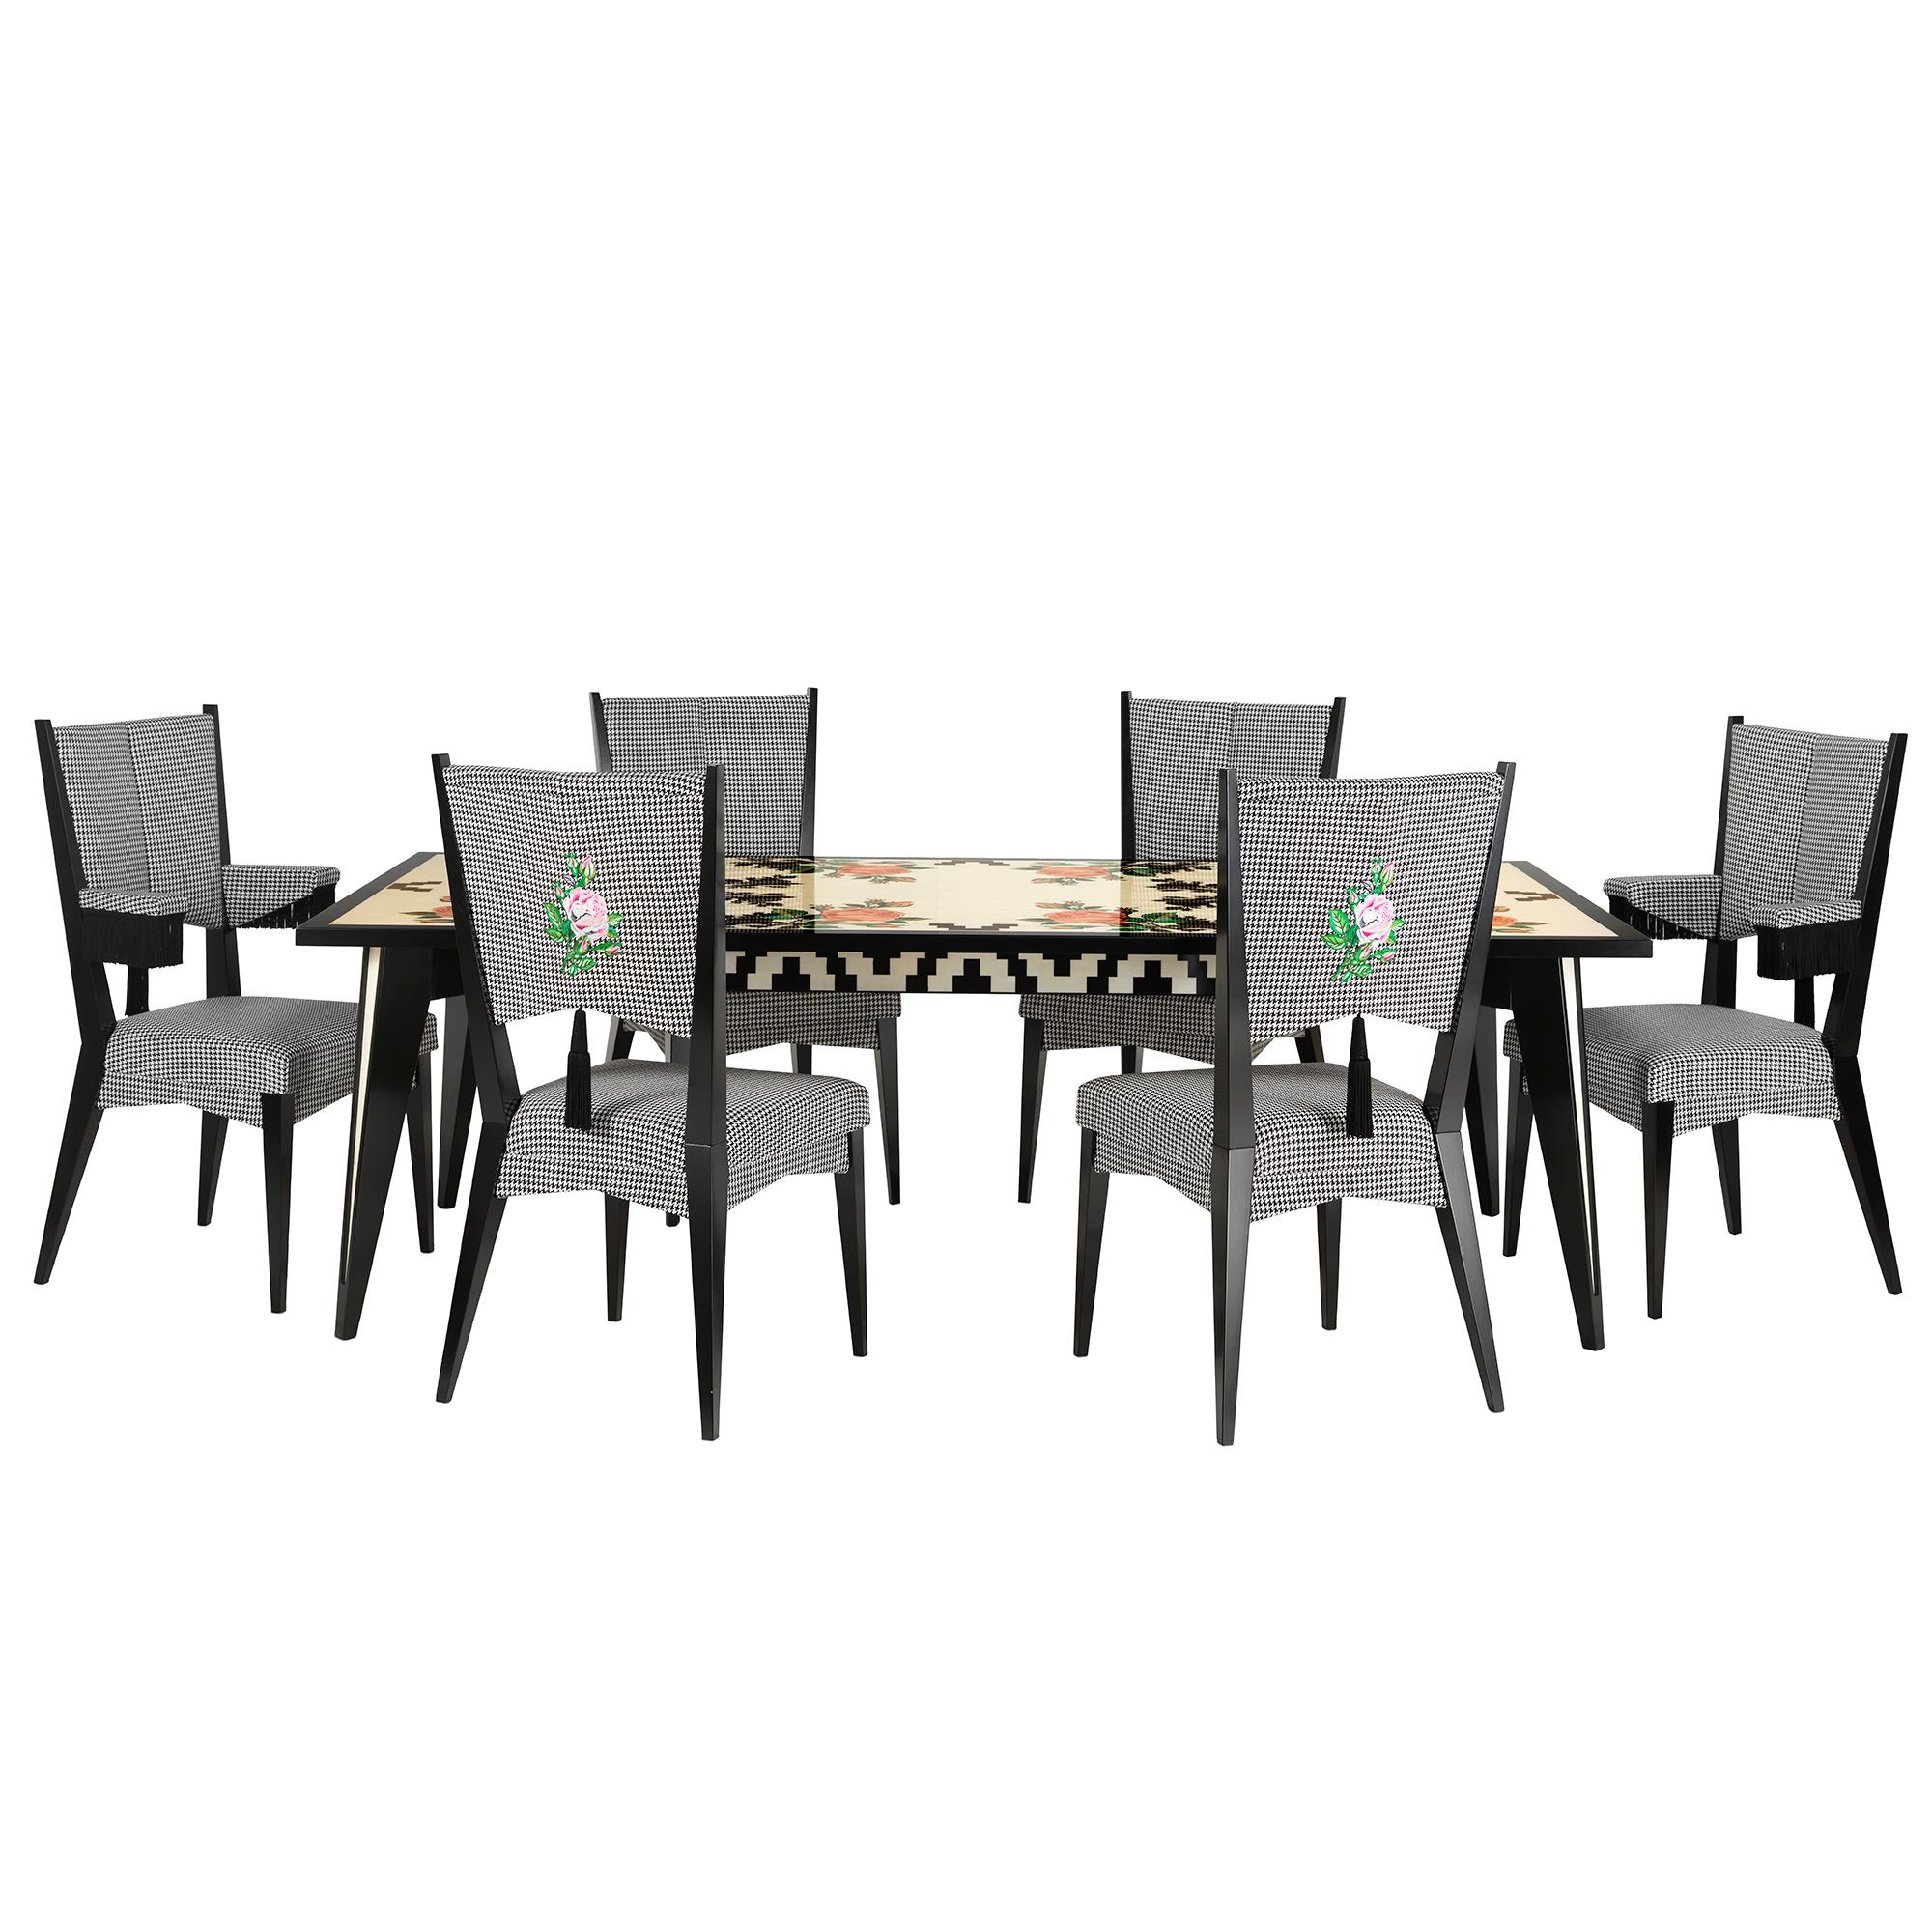 Italian Contemporary 6 Seat Rectangular Table with Roses For Sale